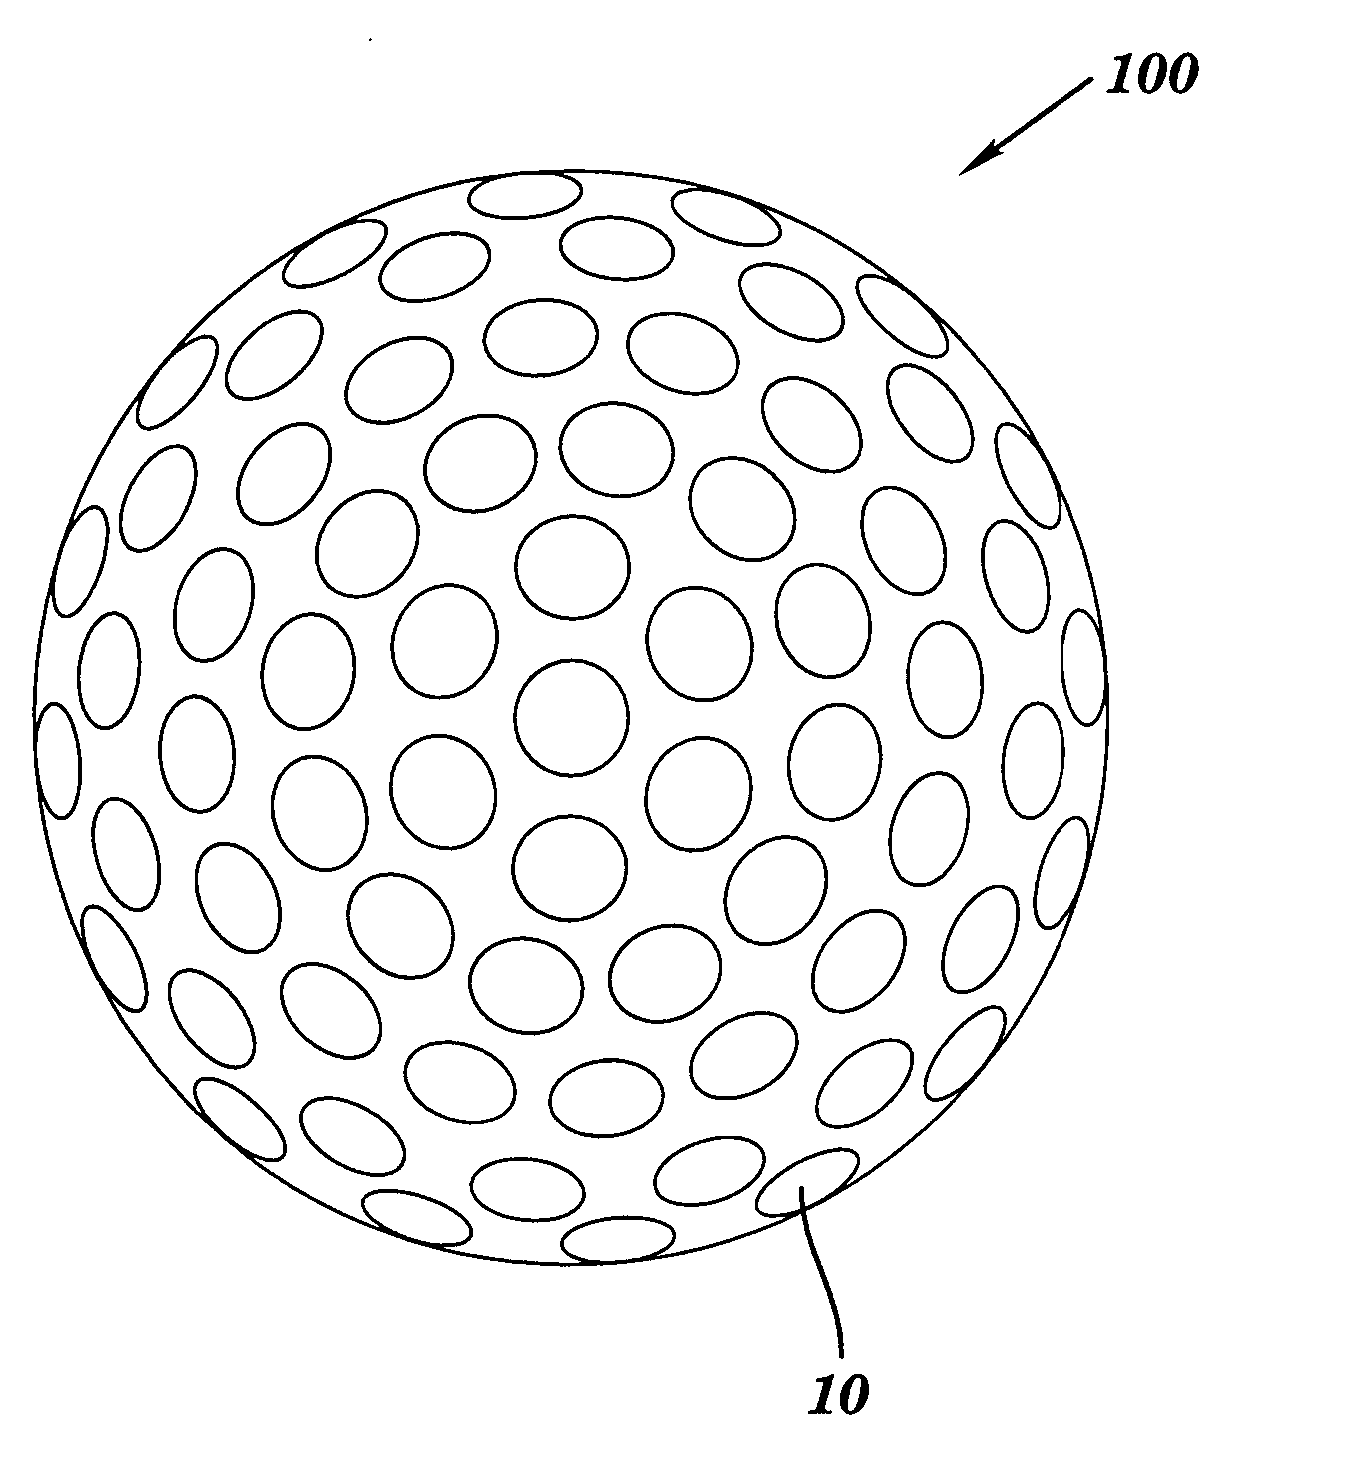 Athletic ball telemetry apparatus and method of use thereof